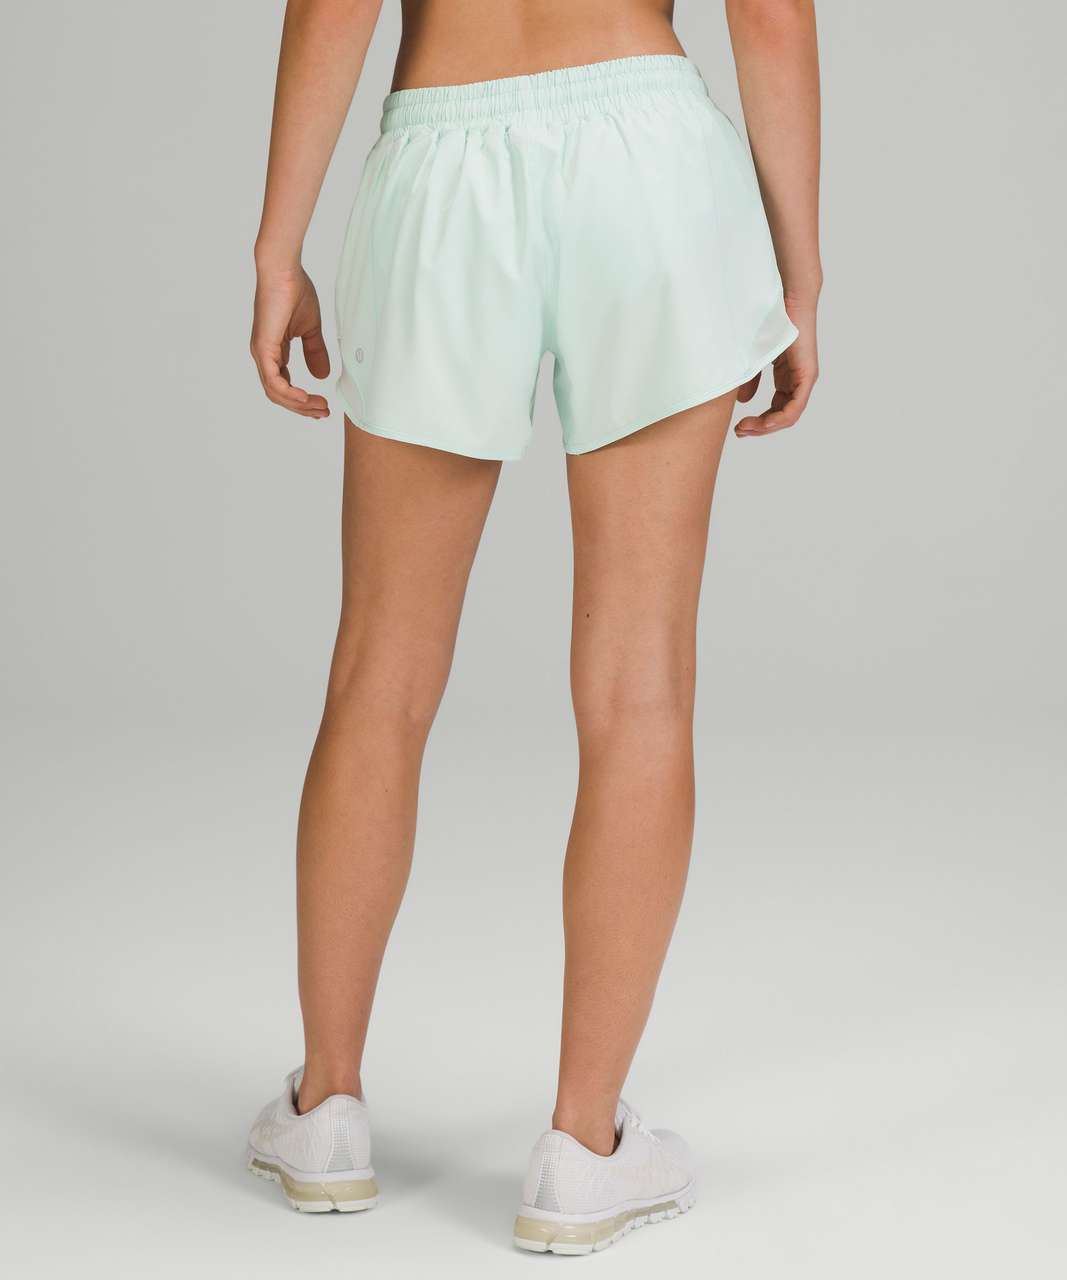 Lululemon Hotty Hot Low-Rise Lined Short 4" - Delicate Mint